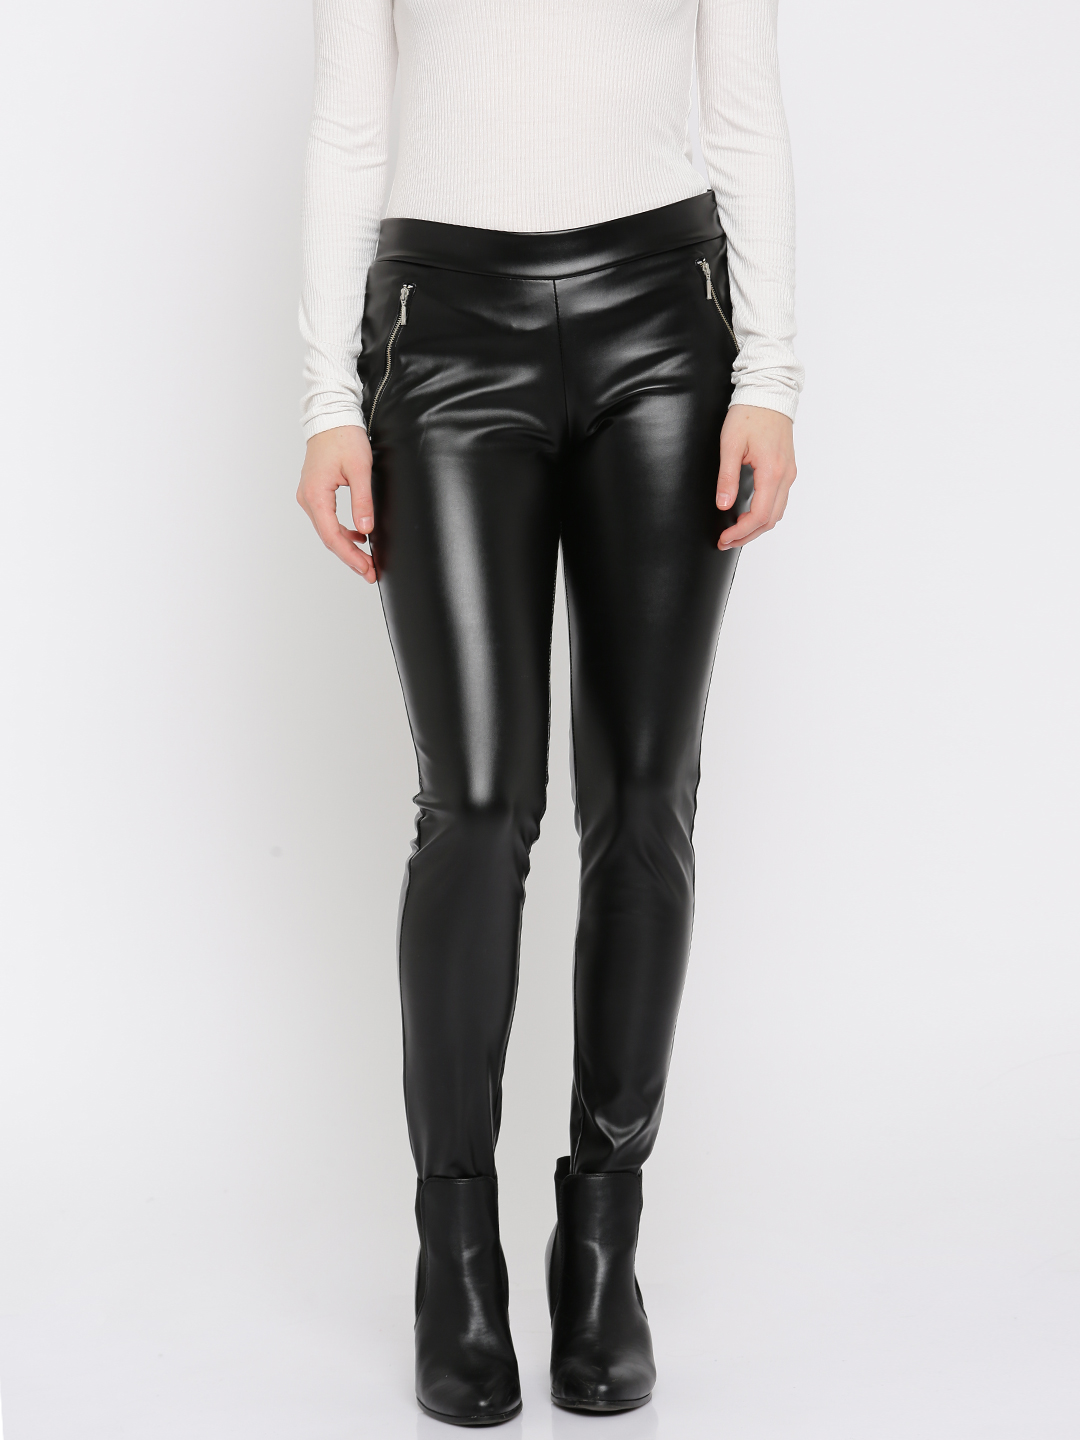 Missy Empire Black Leather-Look Straight Leg Trousers | New Look